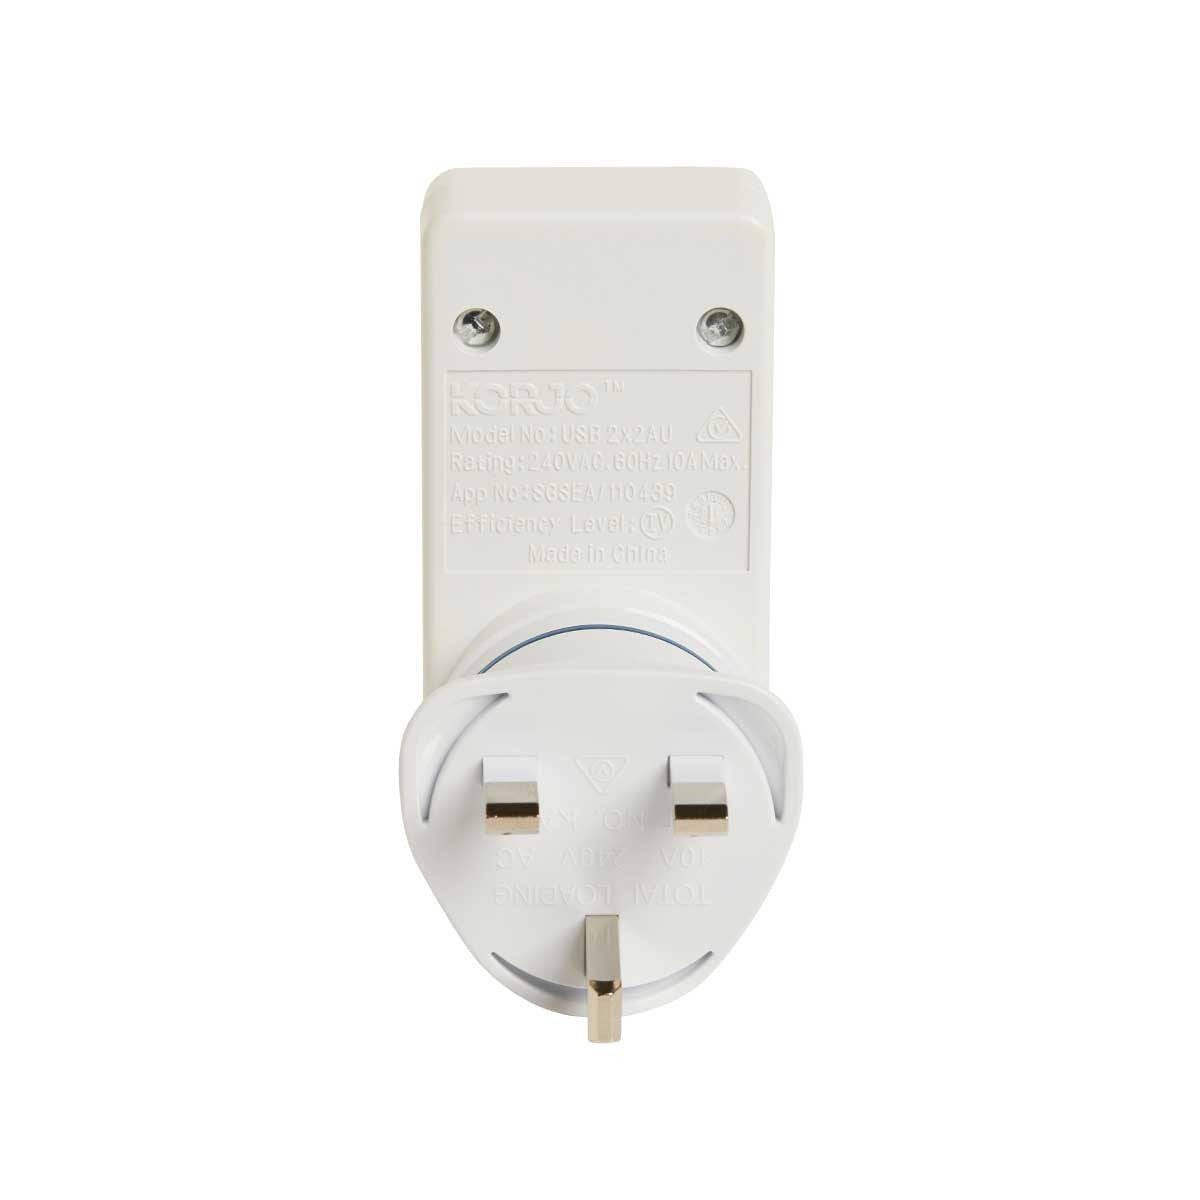 Korjo 2 port USB charger and adaptor Australia and NZ to UK